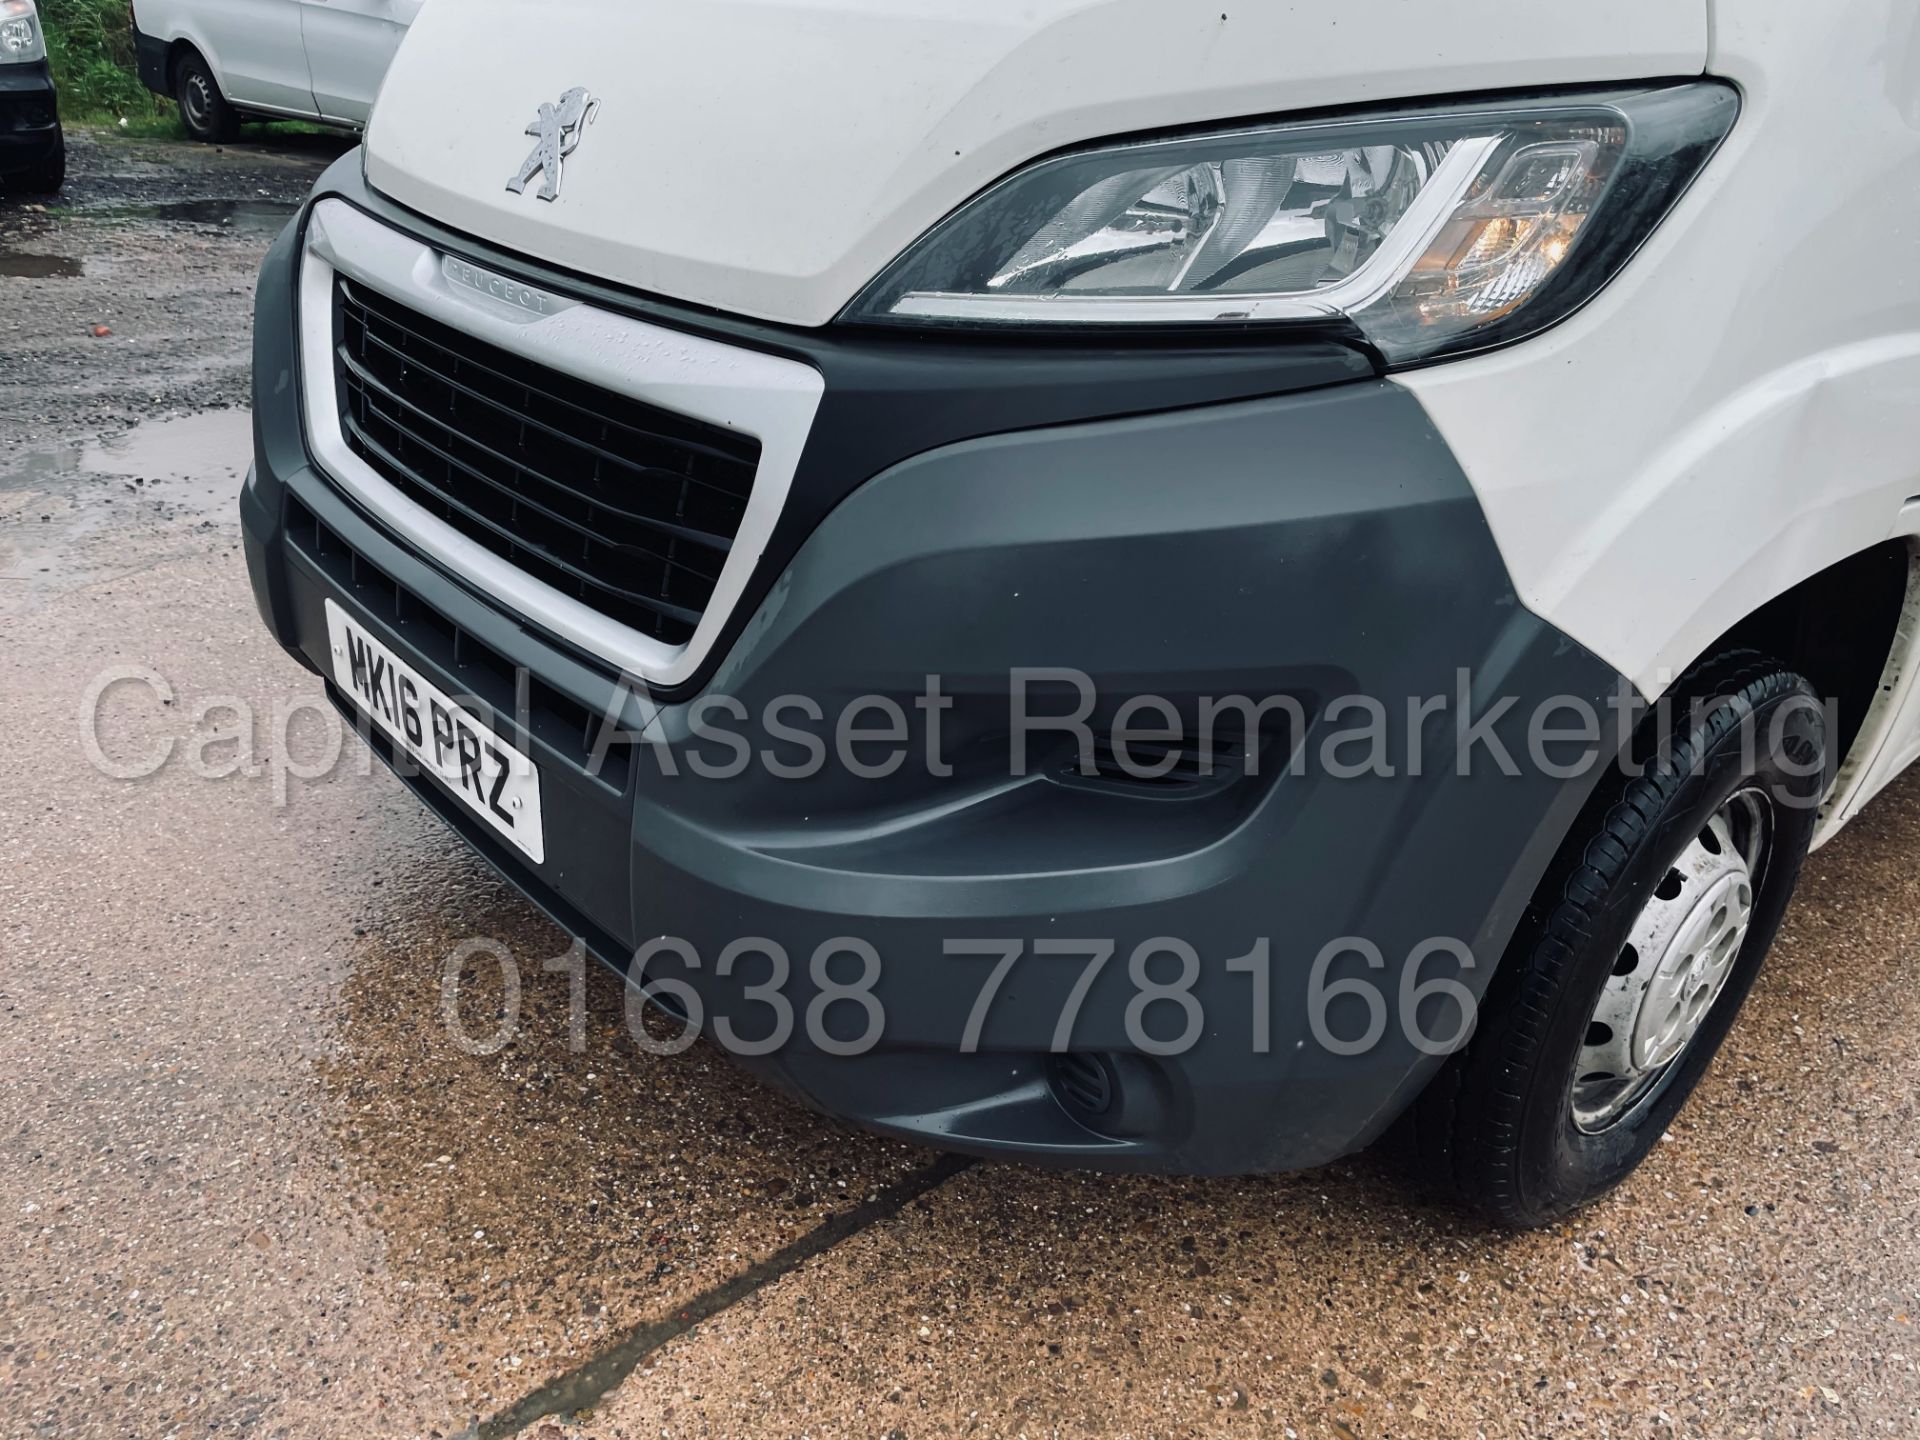 (On Sale) PEUGEOT BOXER 335 *PROFESSIONAL* LWB HI-ROOF (2016) '2.2 HDI - 6 SPEED' *A/C* (1 OWNER) - Image 16 of 41